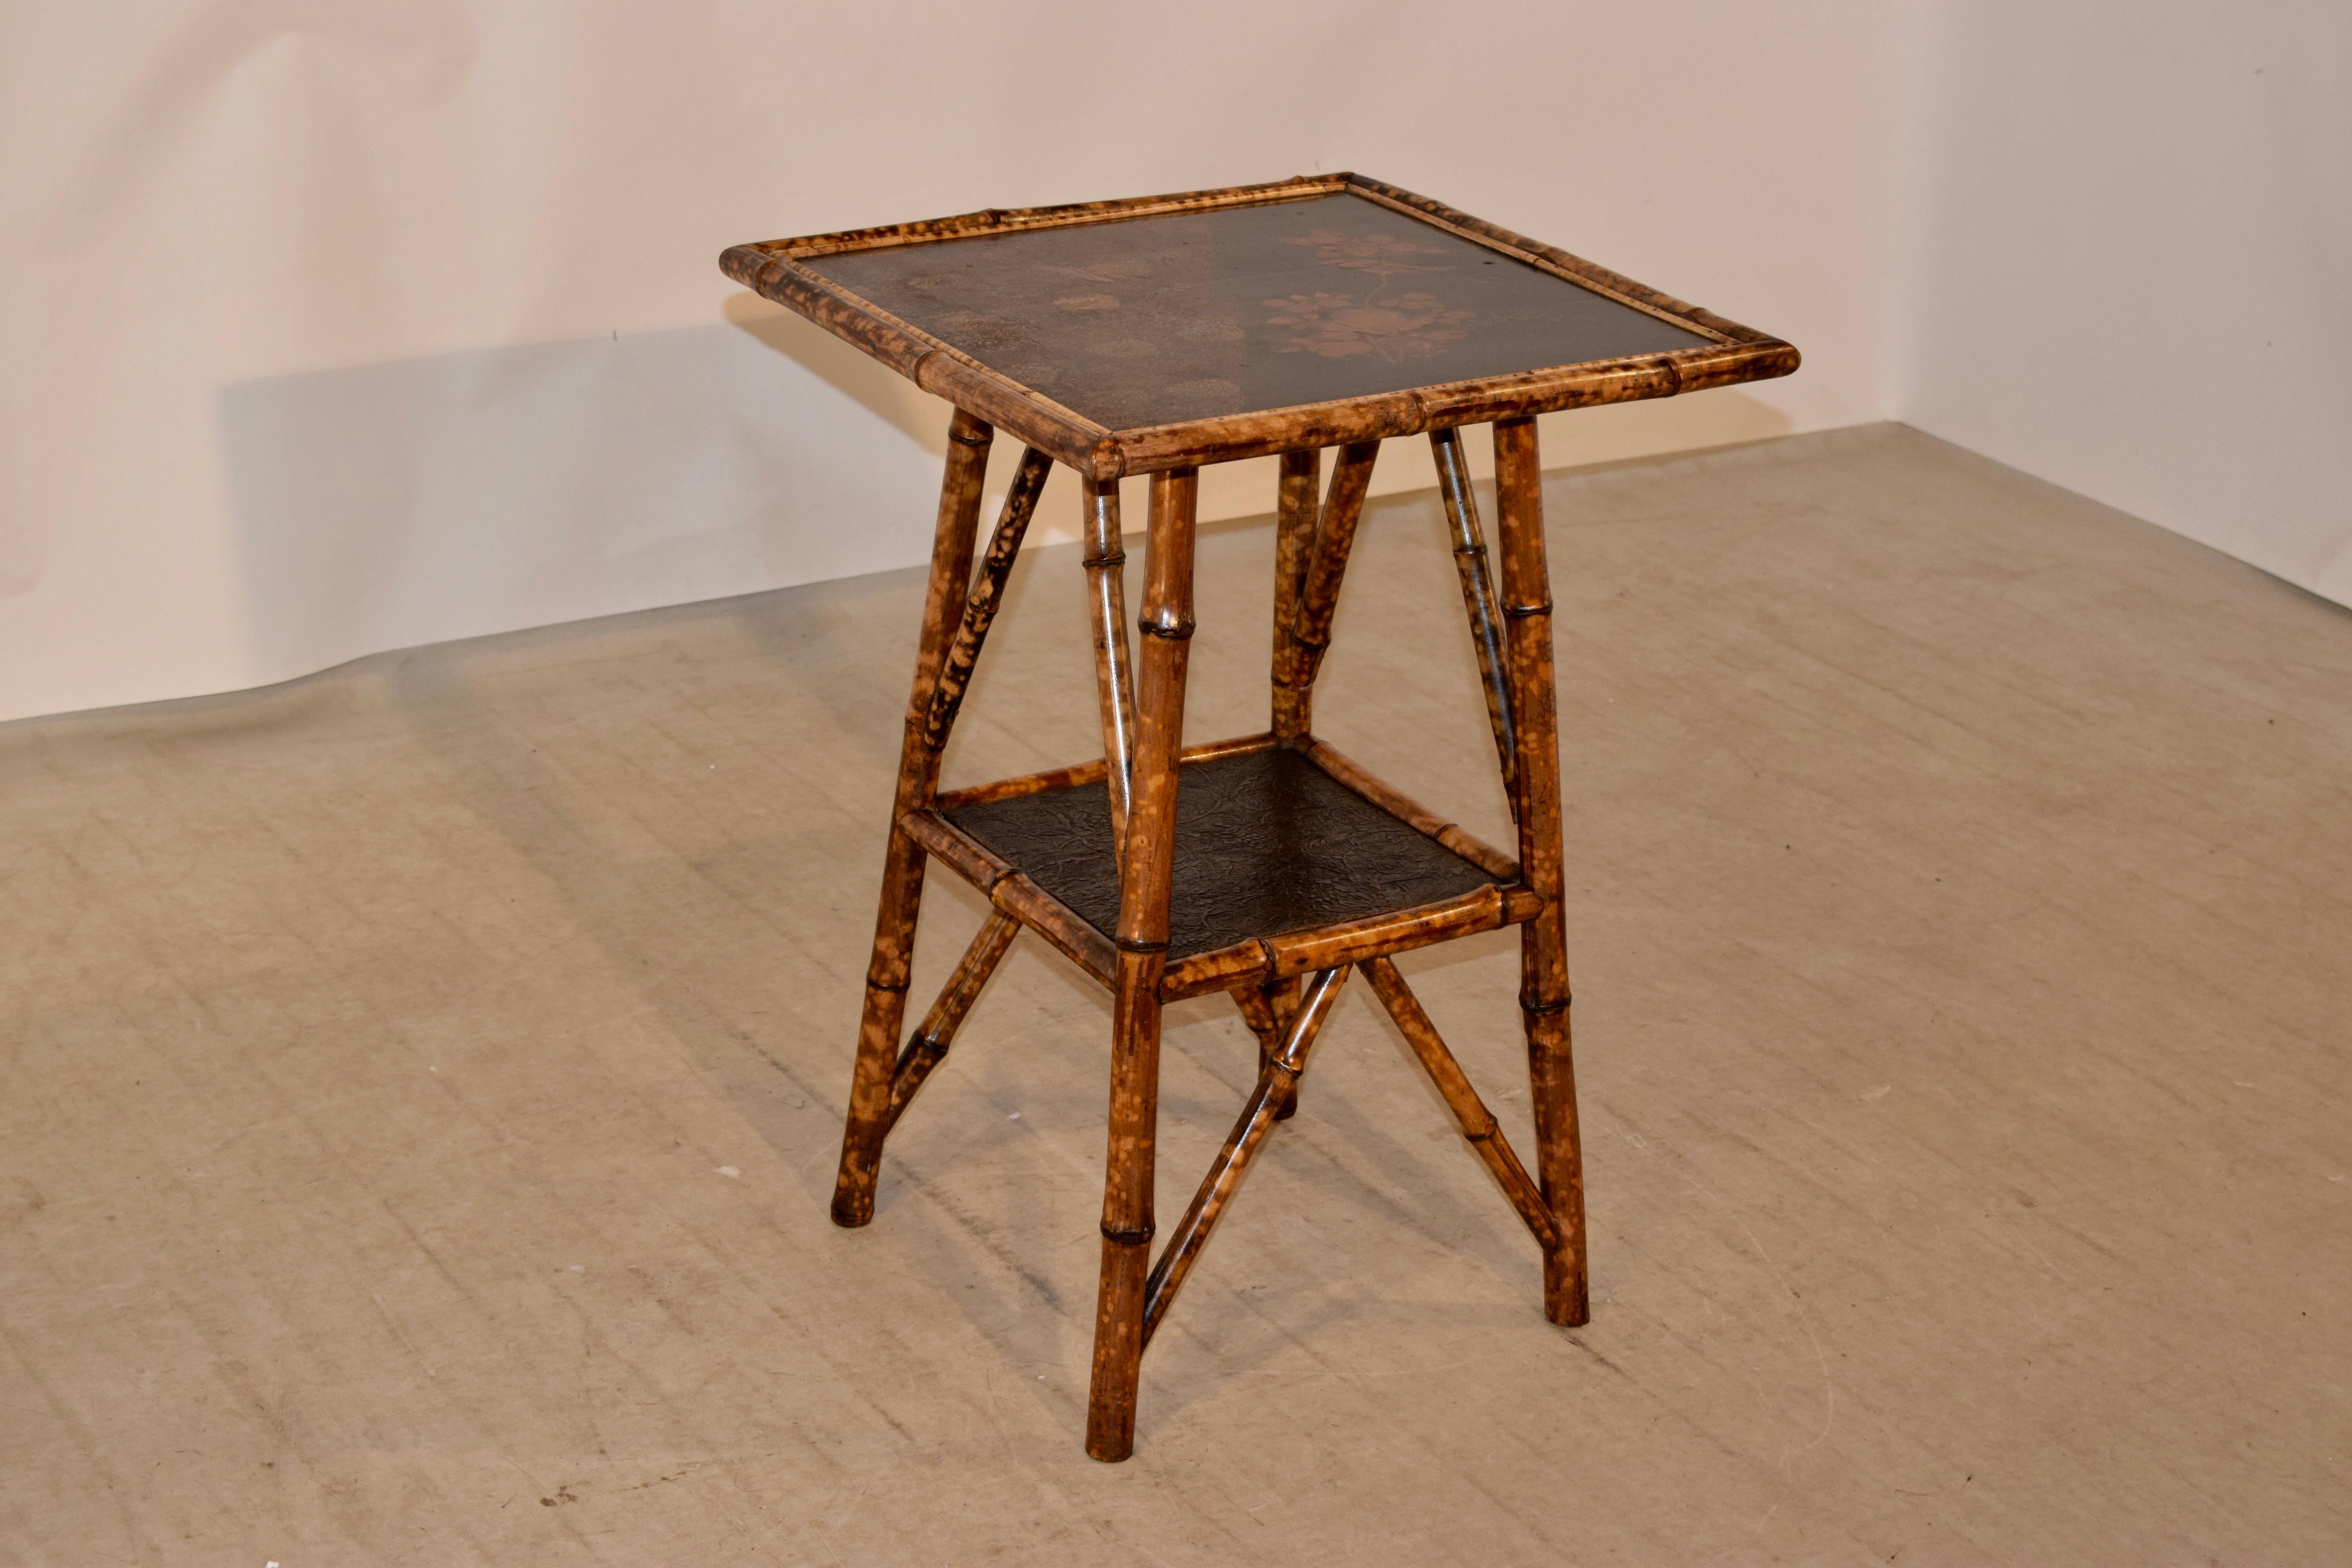 19th century bamboo table from France with a hand painted chinoiserie top, following down to a lower shelf covered with hand painted paper. The table is made from tortoise bamboo and has splayed legs and stretchers.